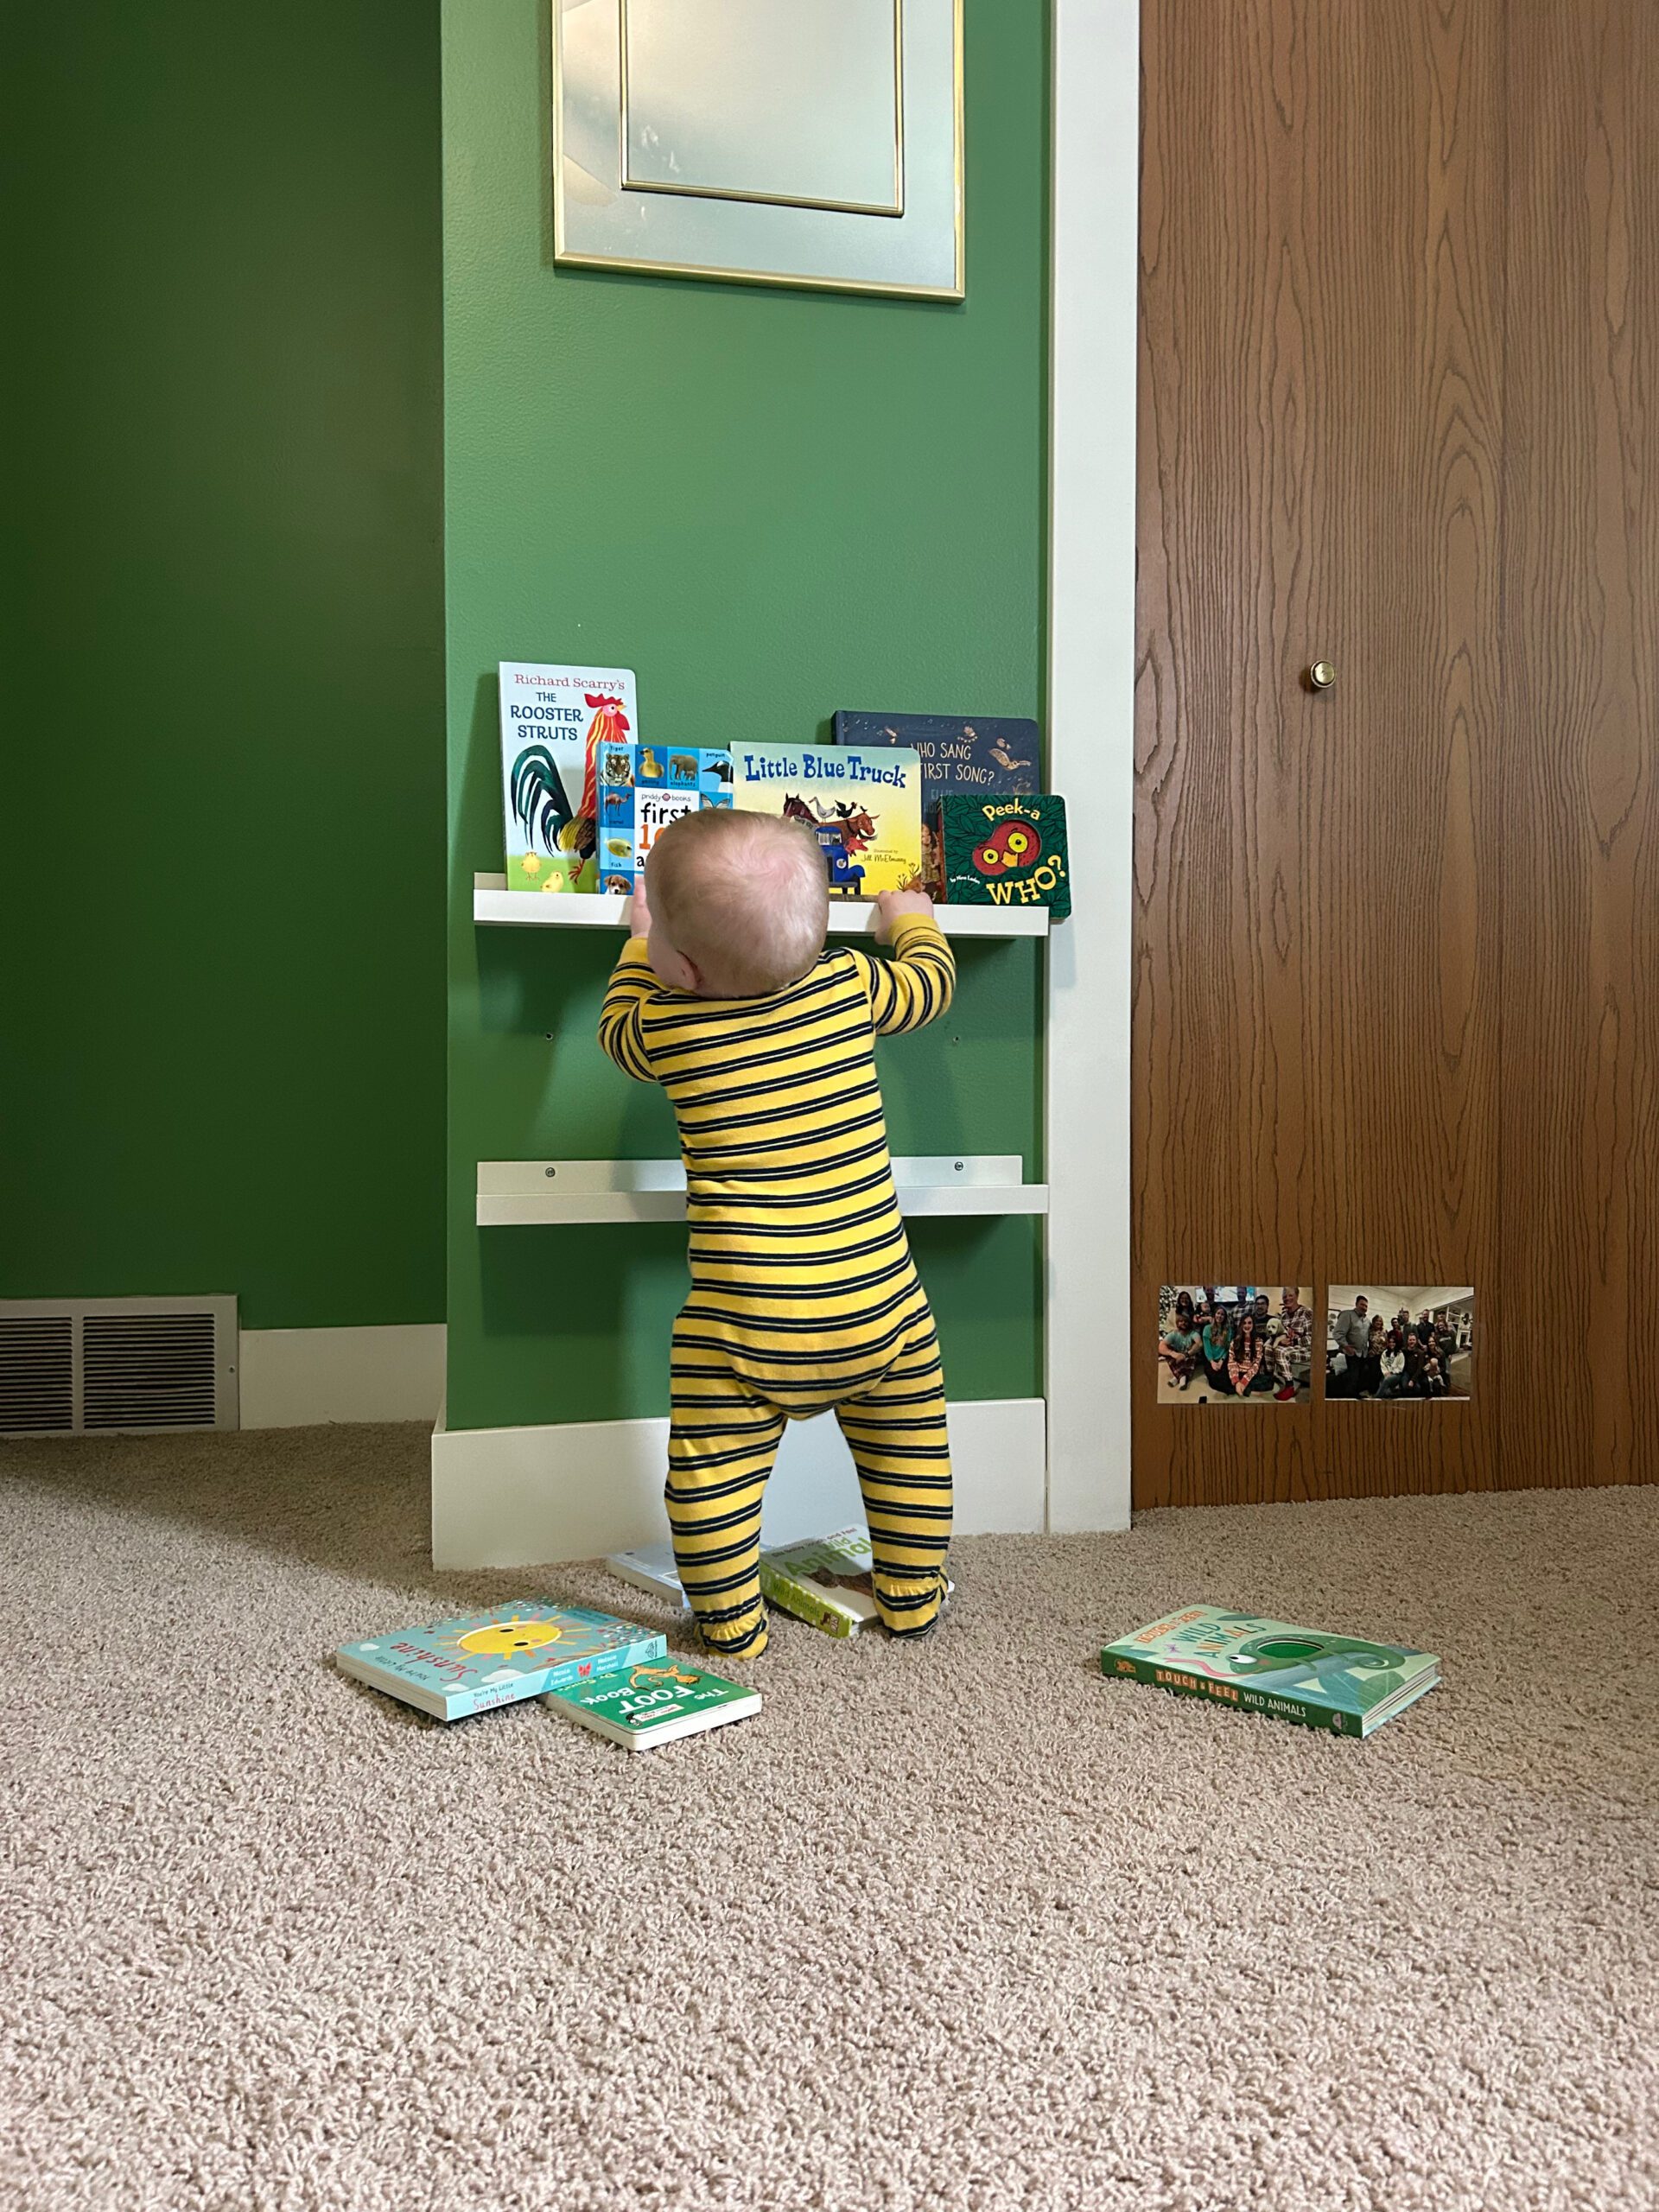 Baby boy holding on to a book shelf to help him balance and learn to walk.